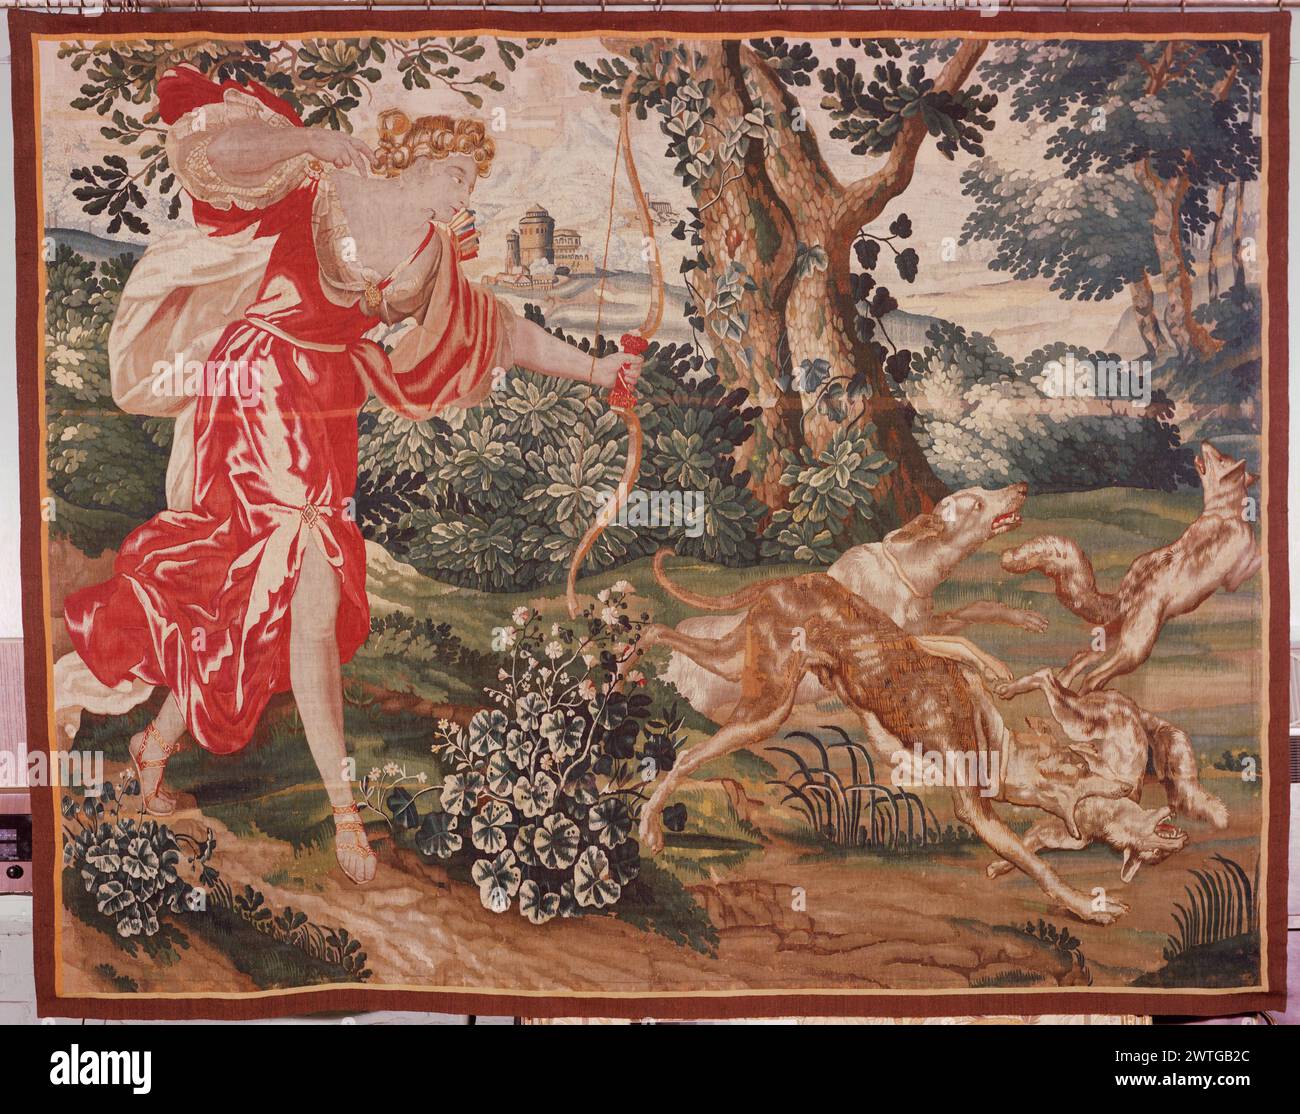 Diana fox hunting. unknown c. 1680-1700 Tapestry Dimensions: H 7'3' x W 9'3' Tapestry Materials/Techniques: unknown Culture: Flemish Weaving Center: Brussels Ownership History: French & Co. purchased from Judson Borglum 12/10/1912; sold to Trinity University 6/11/1964. [SS 9643]. French & Co. purchased from Jeffords W. N. 5/31/1918 [note on SS saying transferred to consignment 9643] [SS 4891]. United States, Texas, San Antonio, Ruth Taylor Art Gallery. In forest, Diana with her hunting dogs, aims her bow at fox (center, foreground); cityscape (L of center, background) Borders missing. French & Stock Photo